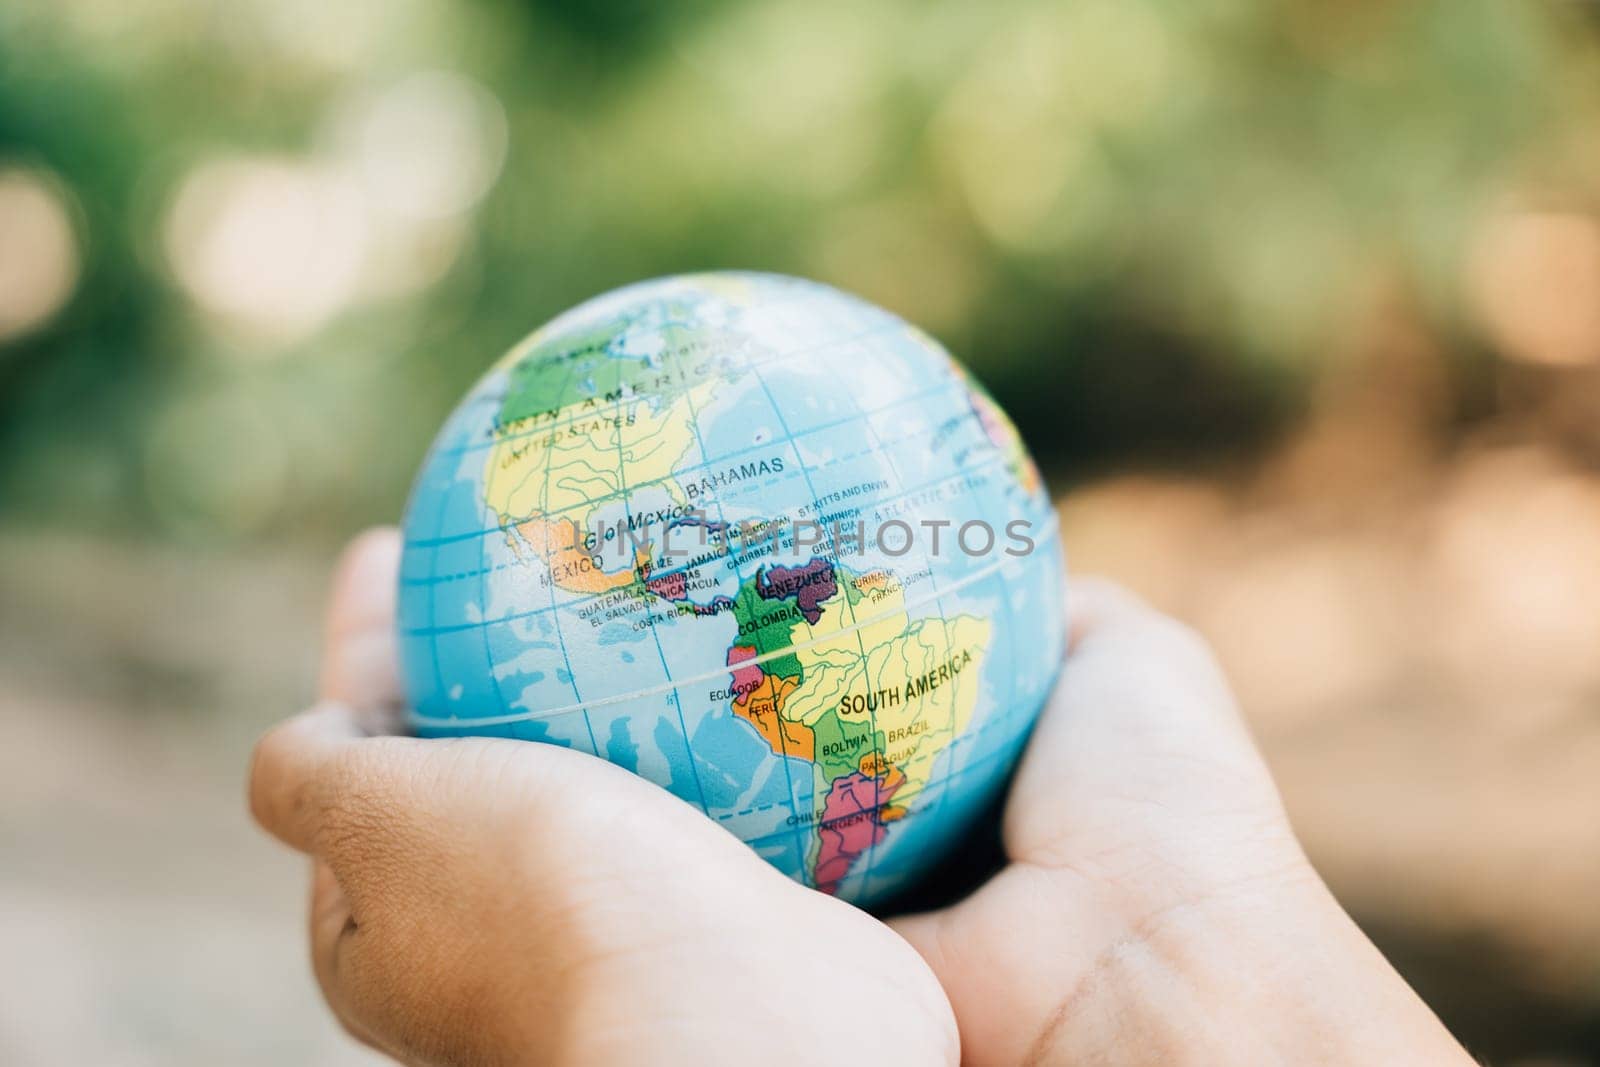 World Earth Day calls for holding the globe and a green leaf, symbolizing Green Energy, ESG, and Environmental Responsibility. Support our planet's vitality and environmental care. by Sorapop